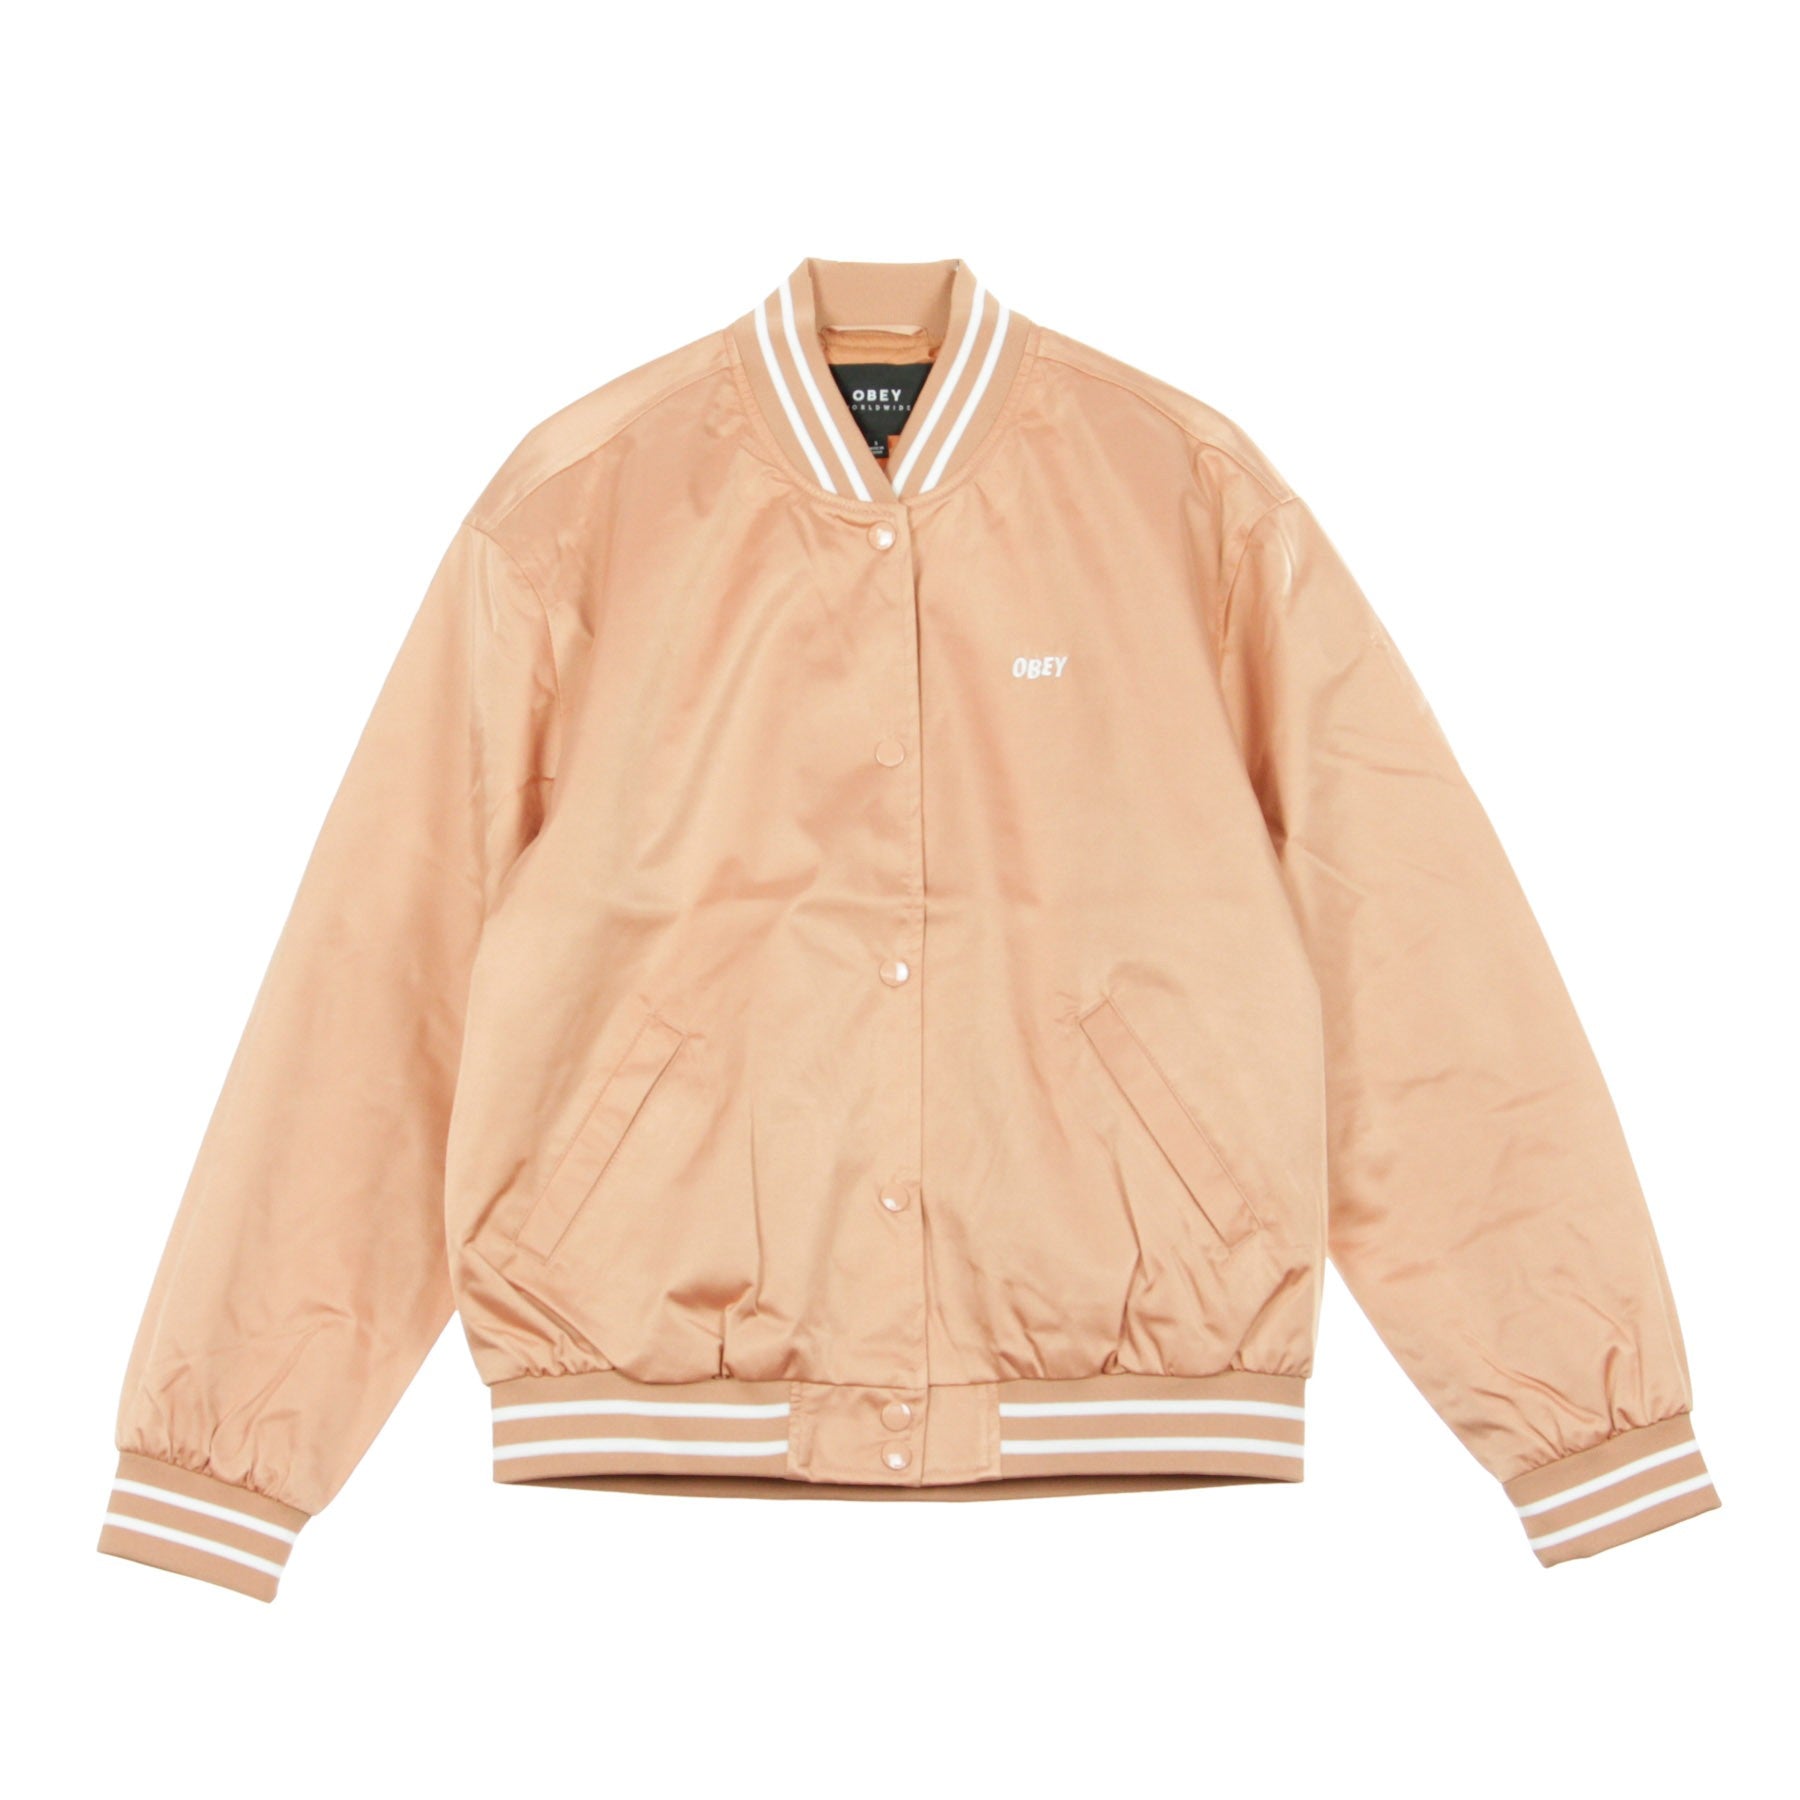 Obey, Giubbotto Bomber Donna Lilah Jacket, Dusty Coral